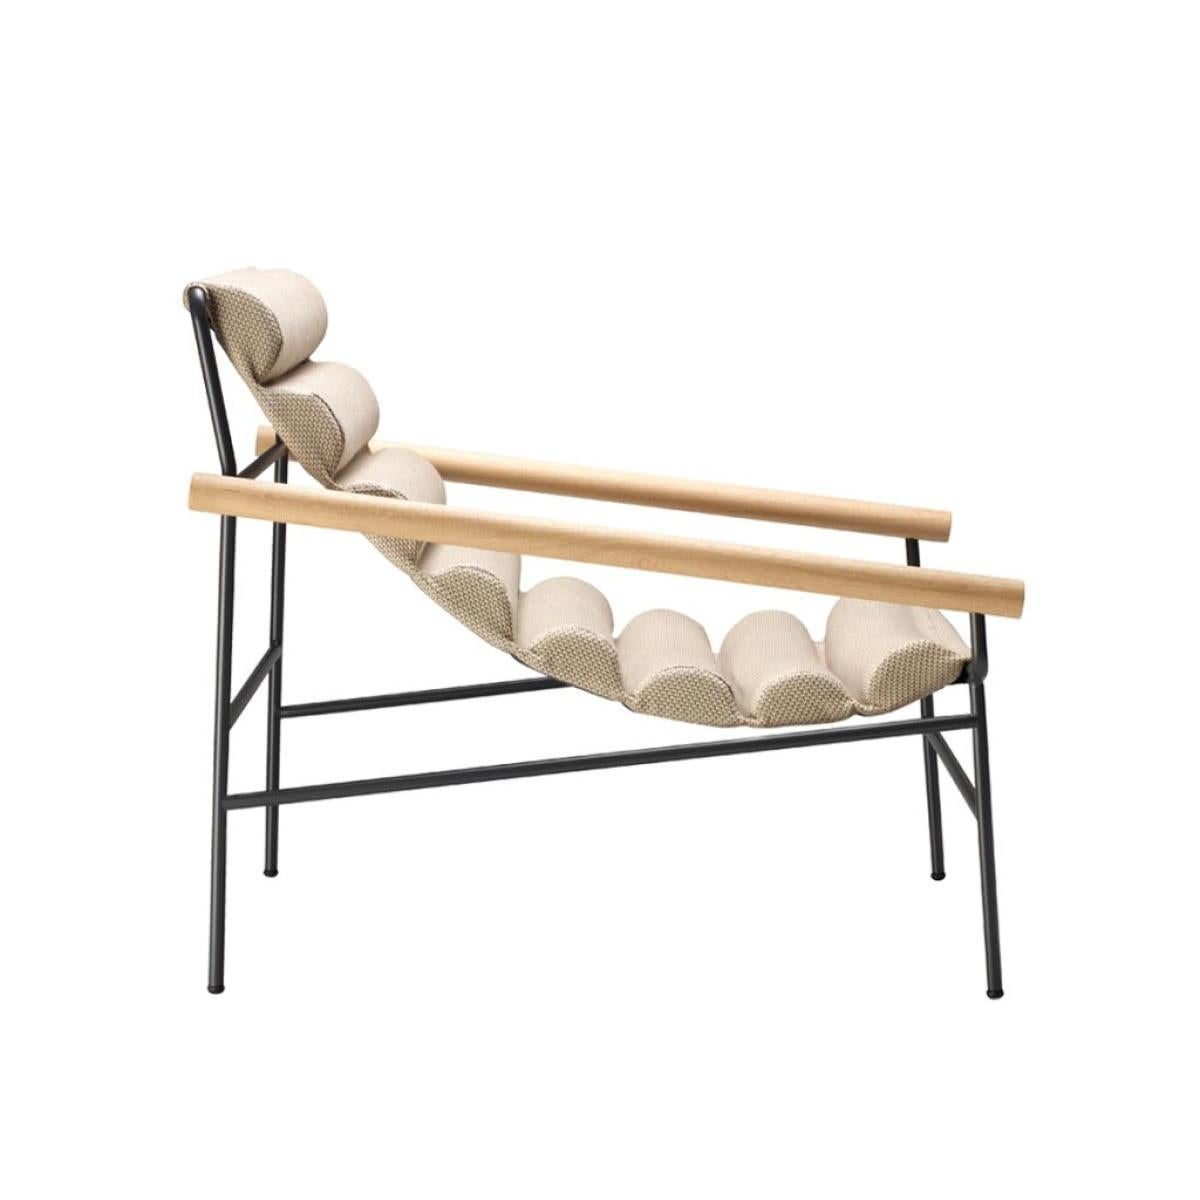 Wave-shaped Cream armchair
Cream-coloured Wave-shaped armchair with cylinder rollers on the back and seat. Very comfortable and original, it can decorate your garden or terrace.
Available in several colours.
This armchair comes with a weather cover,